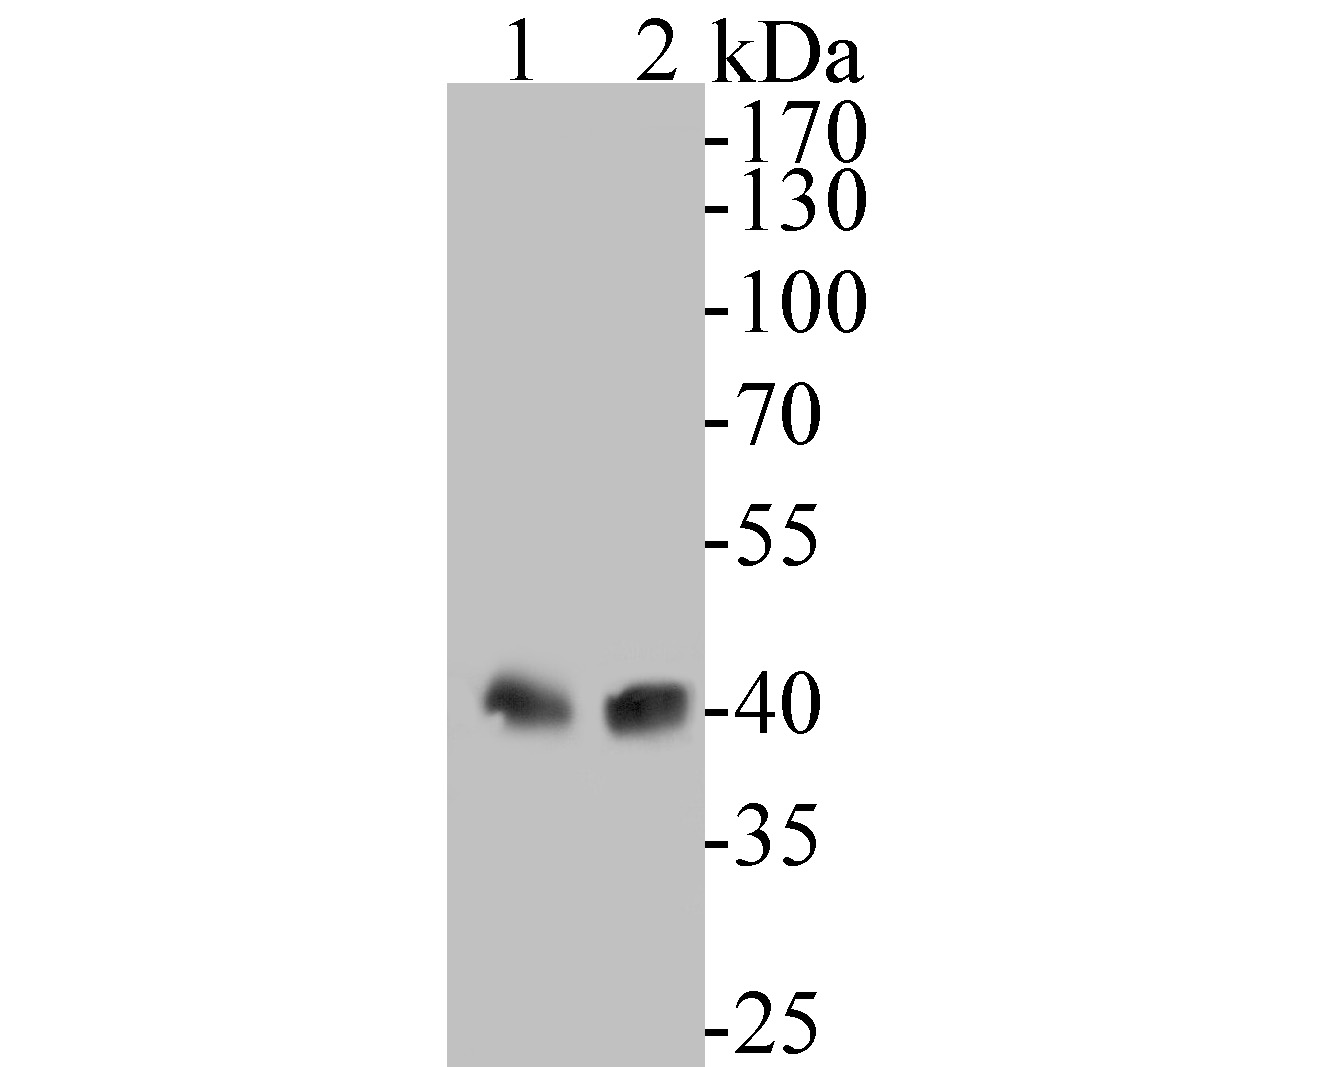 Western blot analysis of HLA F on different lysates. Proteins were transferred to a PVDF membrane and blocked with 5% BSA in PBS for 1 hour at room temperature. The primary antibody (ET7110-39, 1/500) was used in 5% BSA at room temperature for 2 hours. Goat Anti-Rabbit IgG - HRP Secondary Antibody (HA1001) at 1:5,000 dilution was used for 1 hour at room temperature.<br />
Positive control: <br />
Lane 1: Human thymus tissue lysate<br />
Lane 2: Human spleen tissue lysate